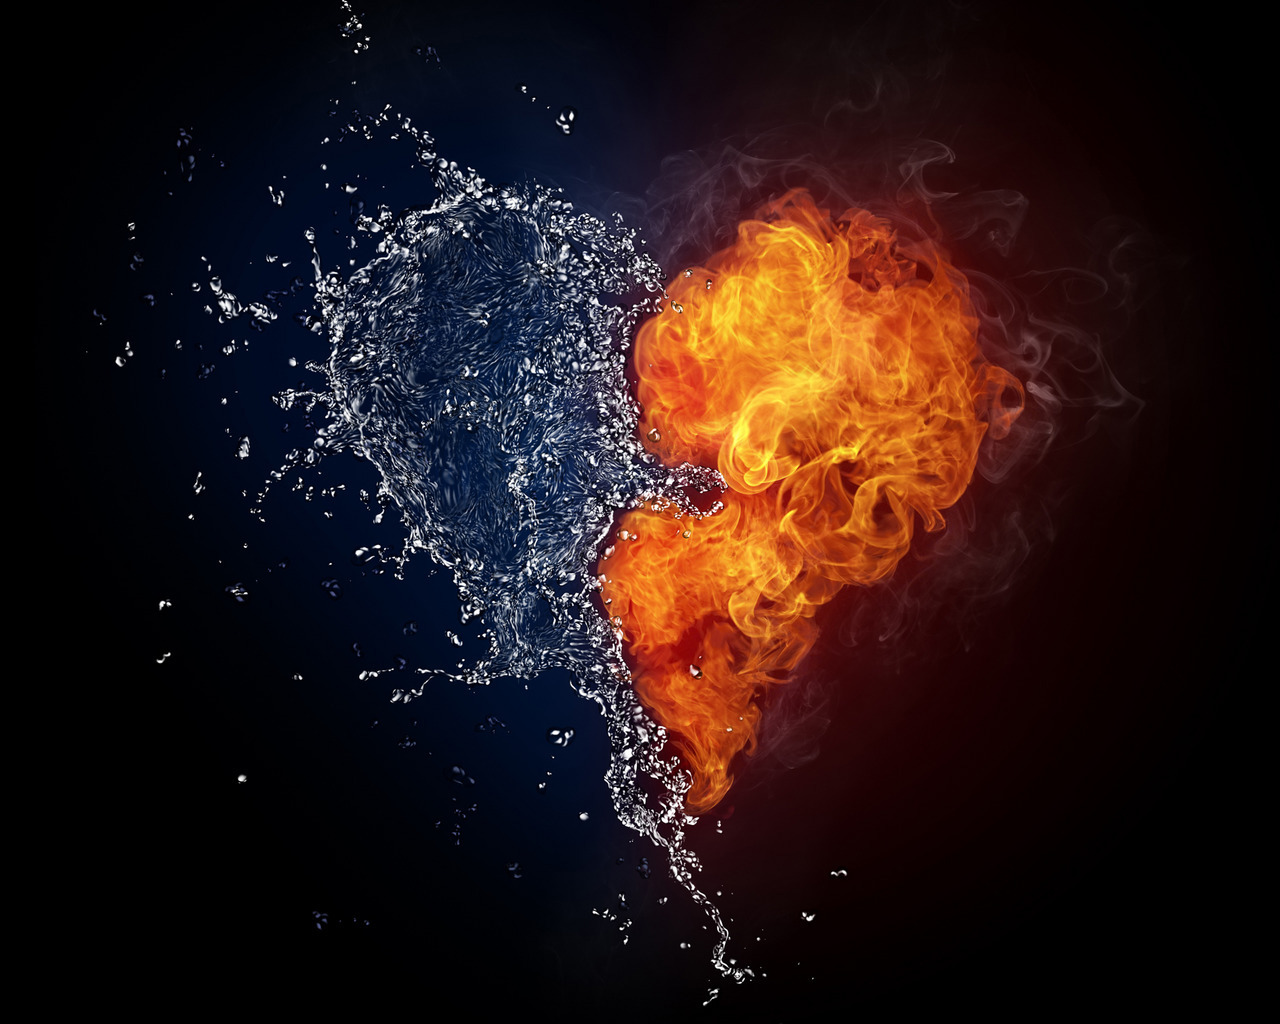 12607 download wallpaper hearts, water, background, art, fire, love, valentine's day screensavers and pictures for free